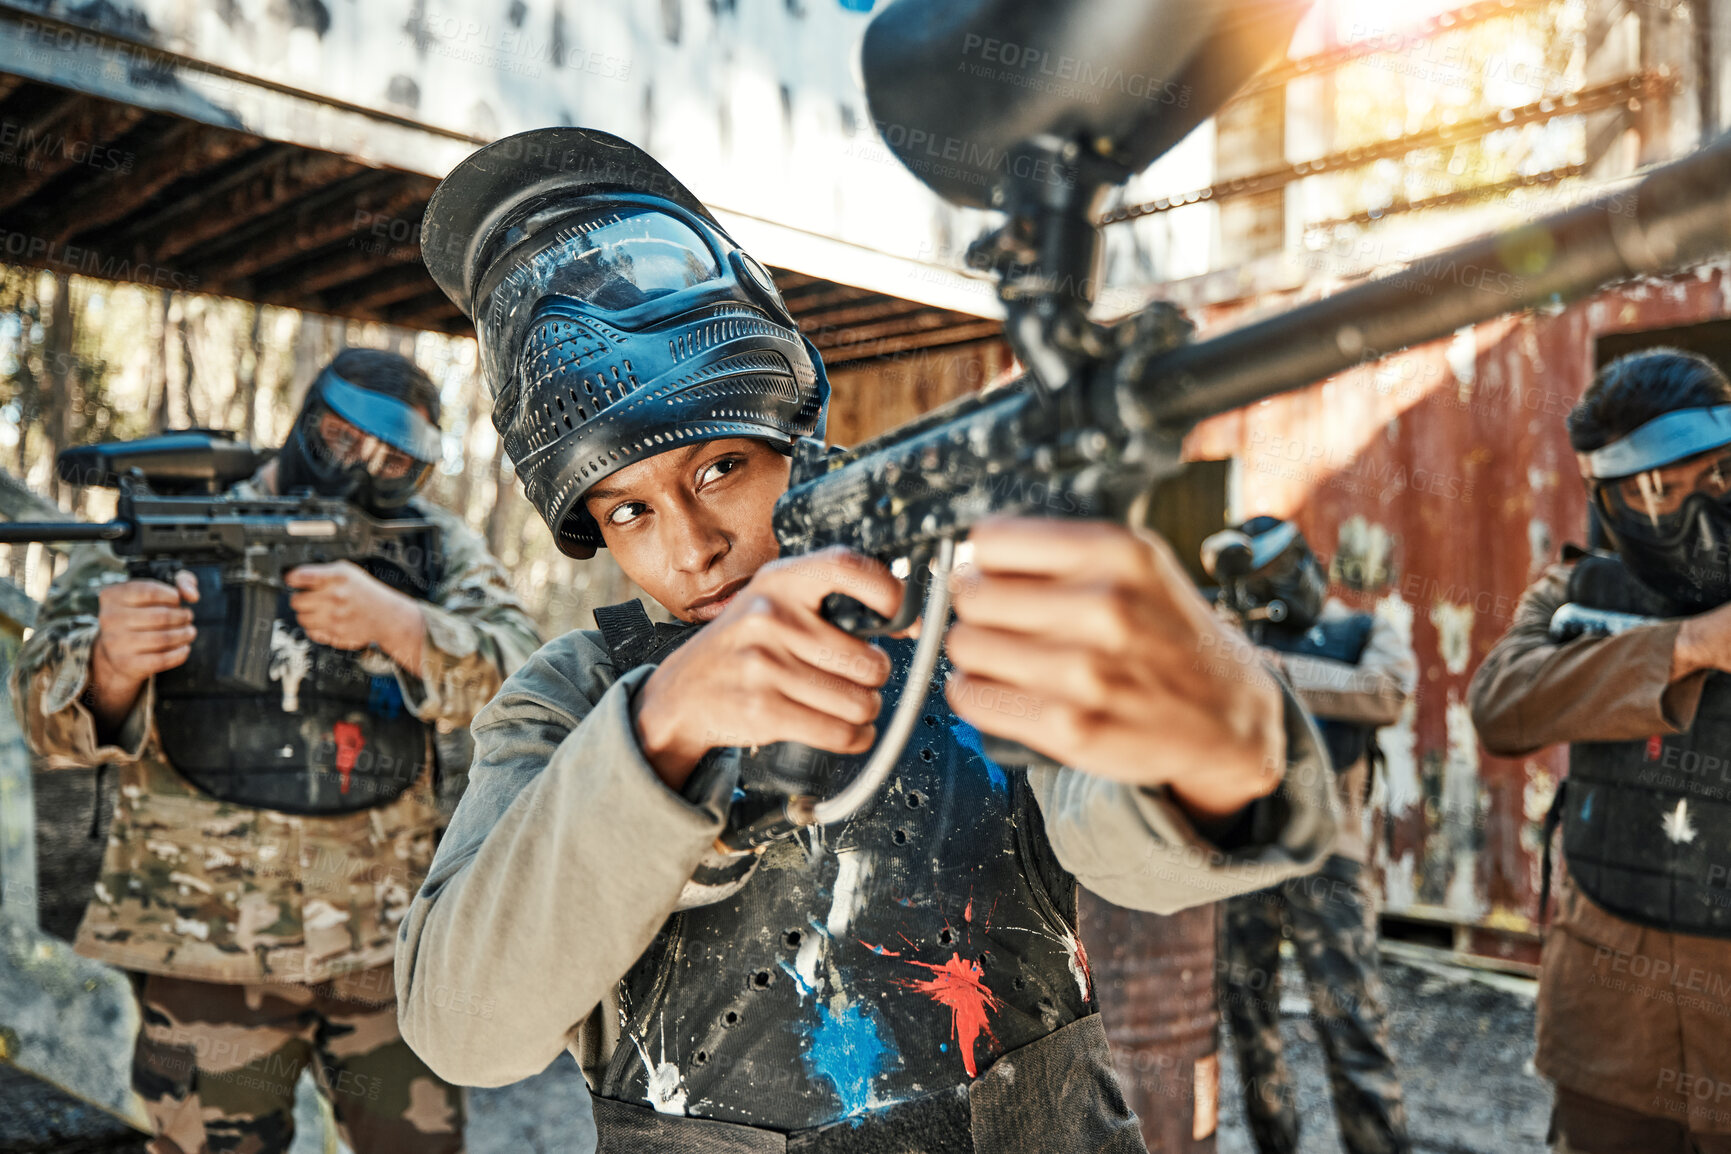 Buy stock photo Paintball team, gun and woman aim, focus and shooting at target practice, competition or military conflict, fight or mission. Group, soldier or people point weapon in survival war, training or battle